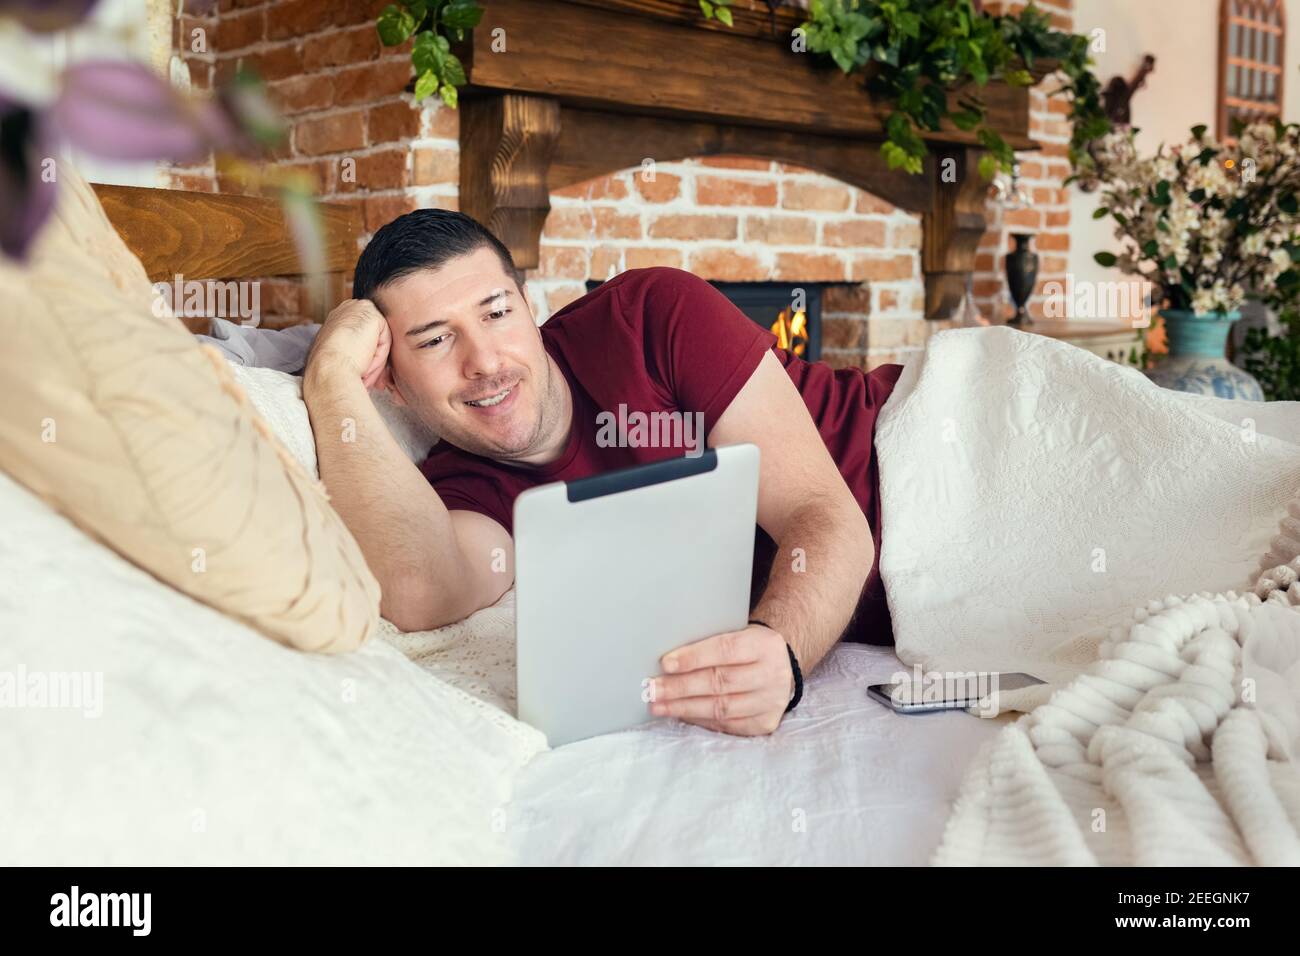 Happy man chatting on digital tablet app while relaxing in cozy bed at home Stock Photo